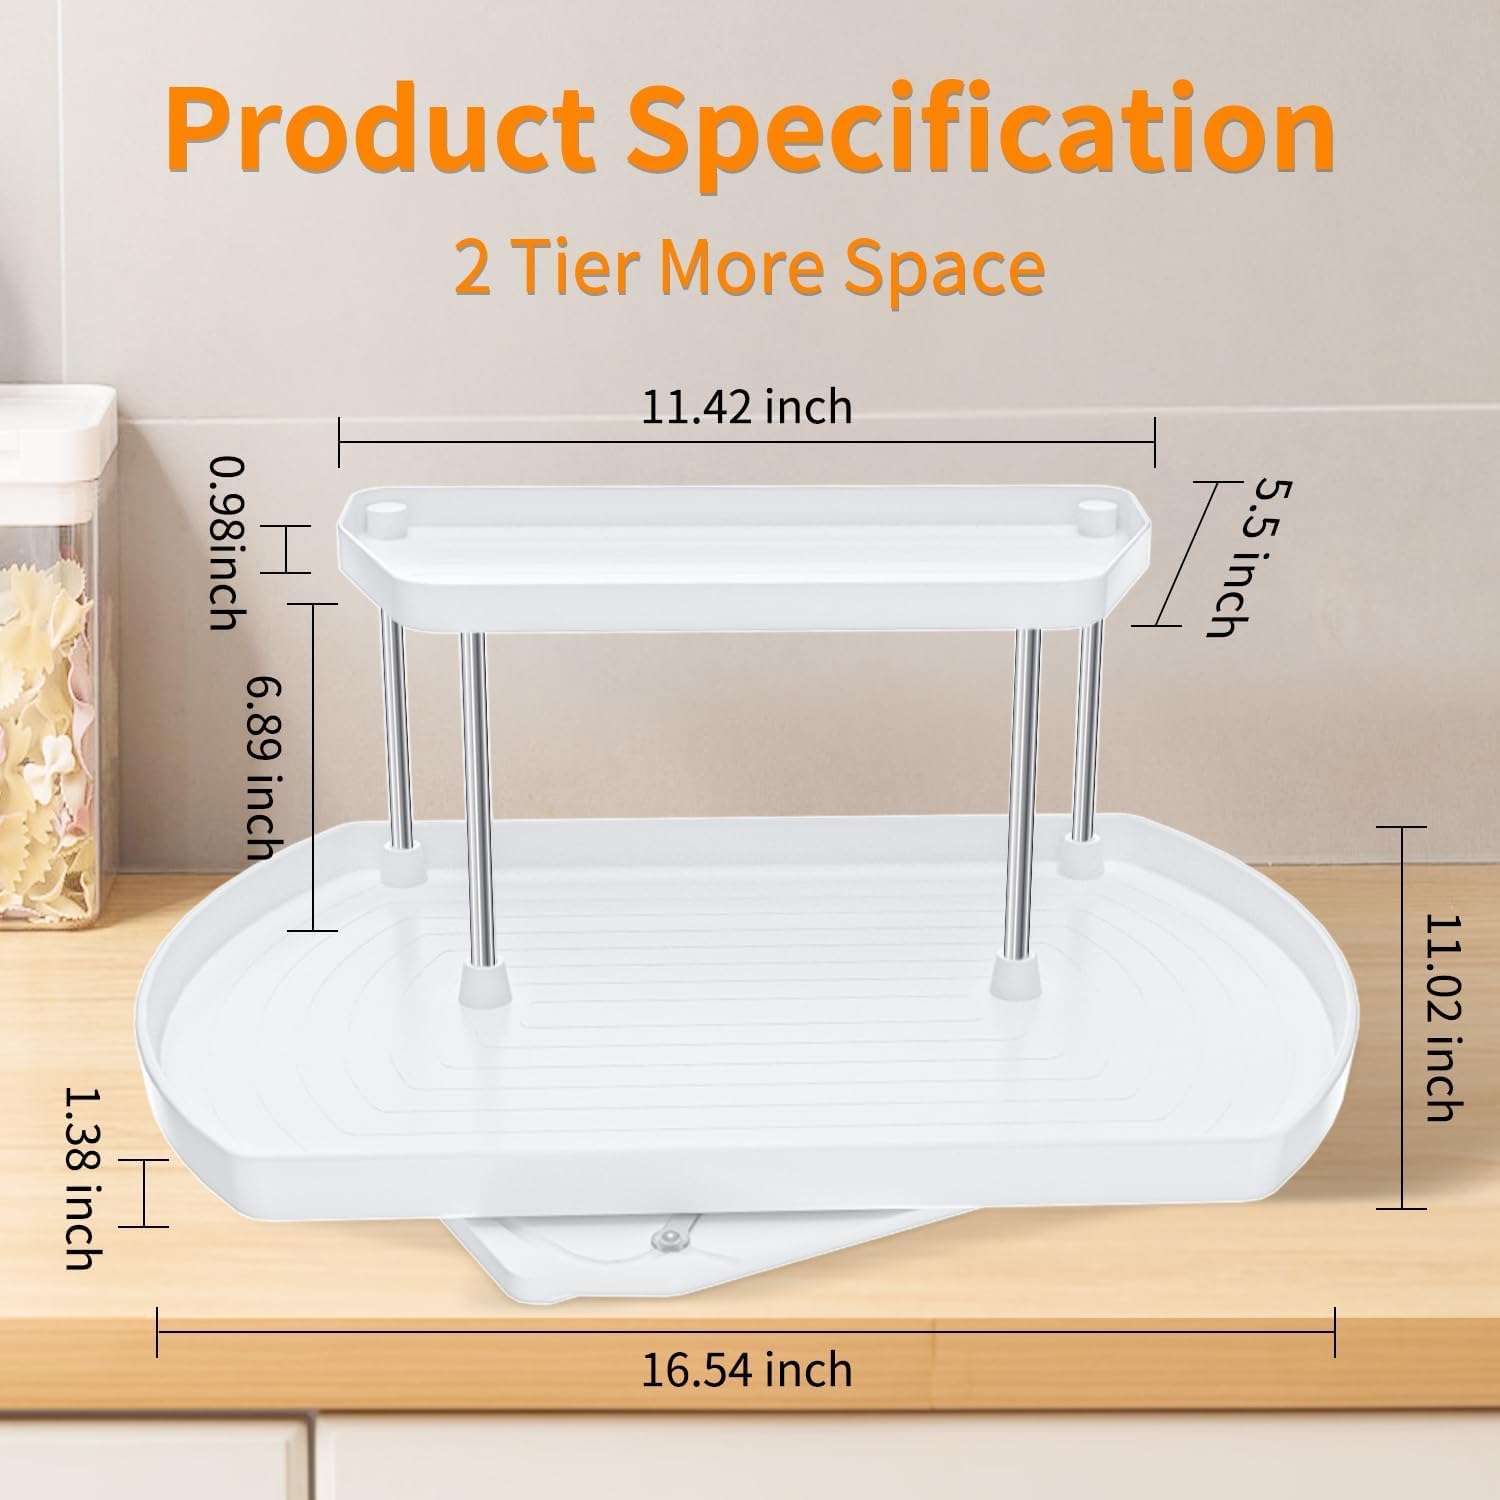 Lazy Susan for Refrigerator, 16.54'' Rectangular 2 Tier Lazy Susan Turntable Fridge Organizers and Storage Cabinet,Pantry, Kitchen, Dining Table,Countertop, Spice Rack